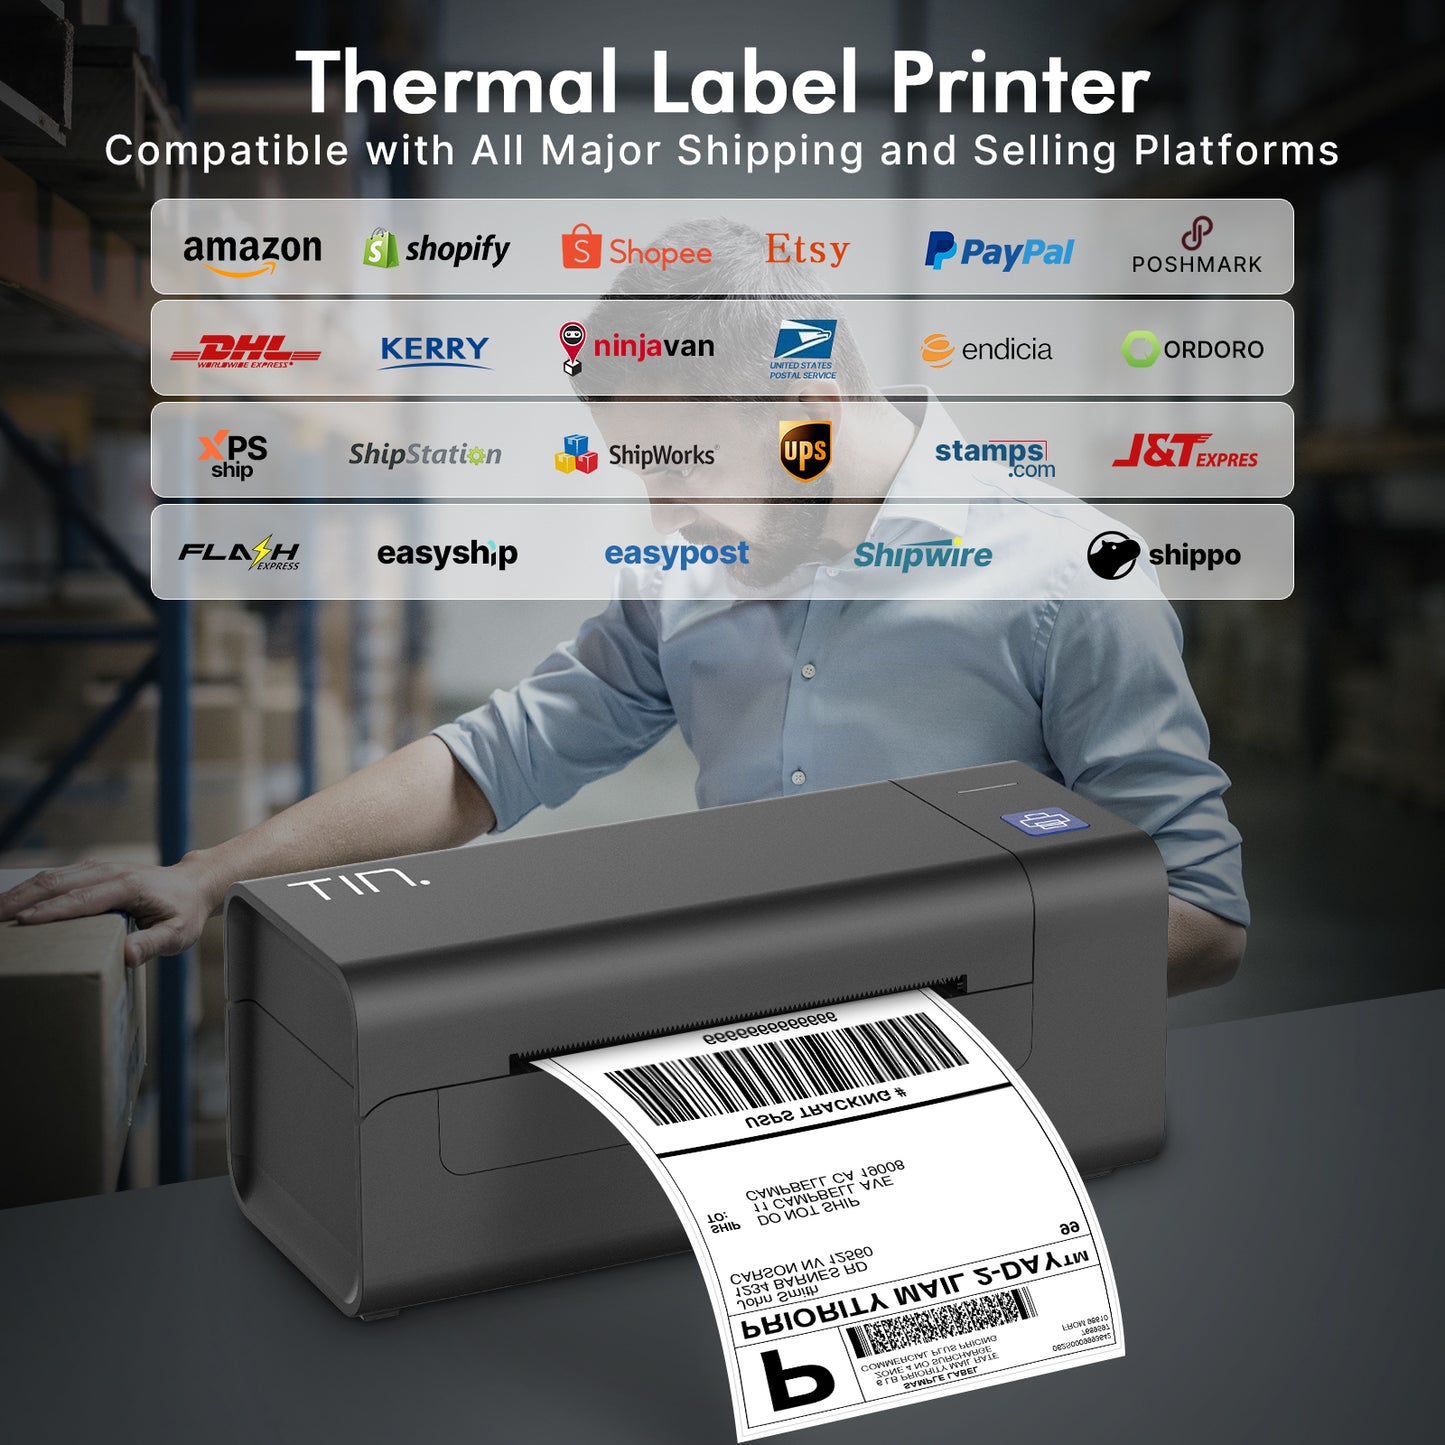 TIN Thermal Label Printer, Thermal Shipping Label Printer, 4x6 Label Maker for Small Business, Compatible with Amazon, Ebay, Shopify, FedEx, UPS, USB Label Printer Supports Windows, Mac, Chromebook